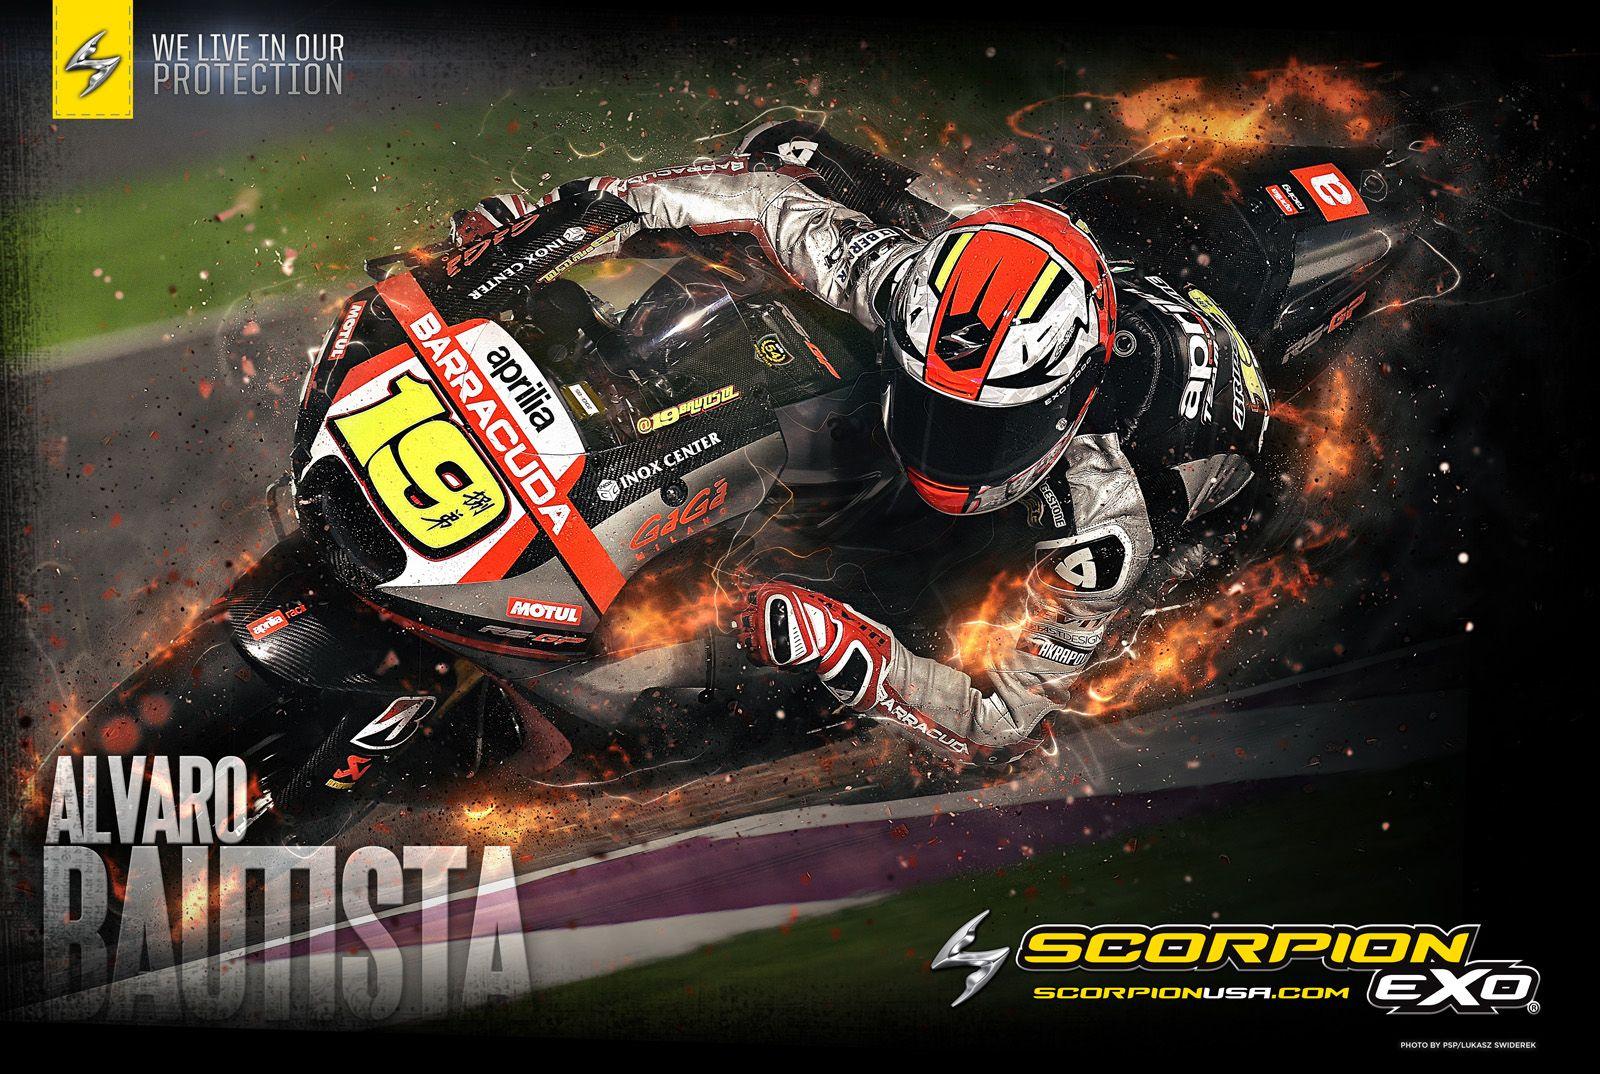 Scorpion Sports Inc. USA - Motorcycle Helmets and Apparel